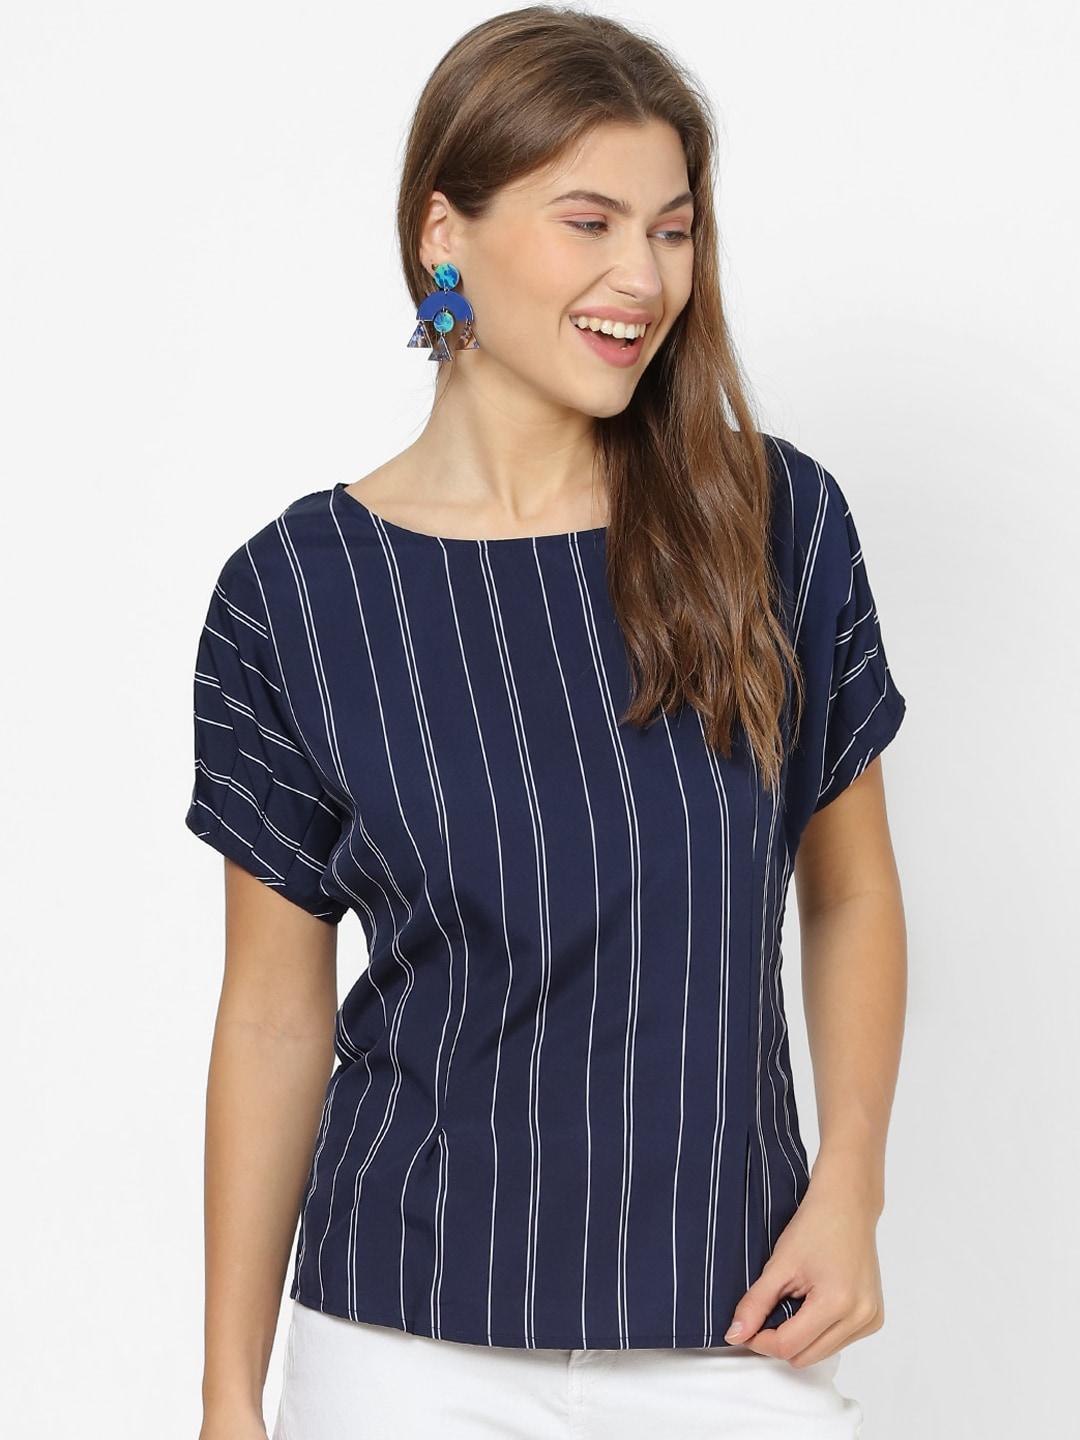 forever-21-women-navy-blue-striped-top